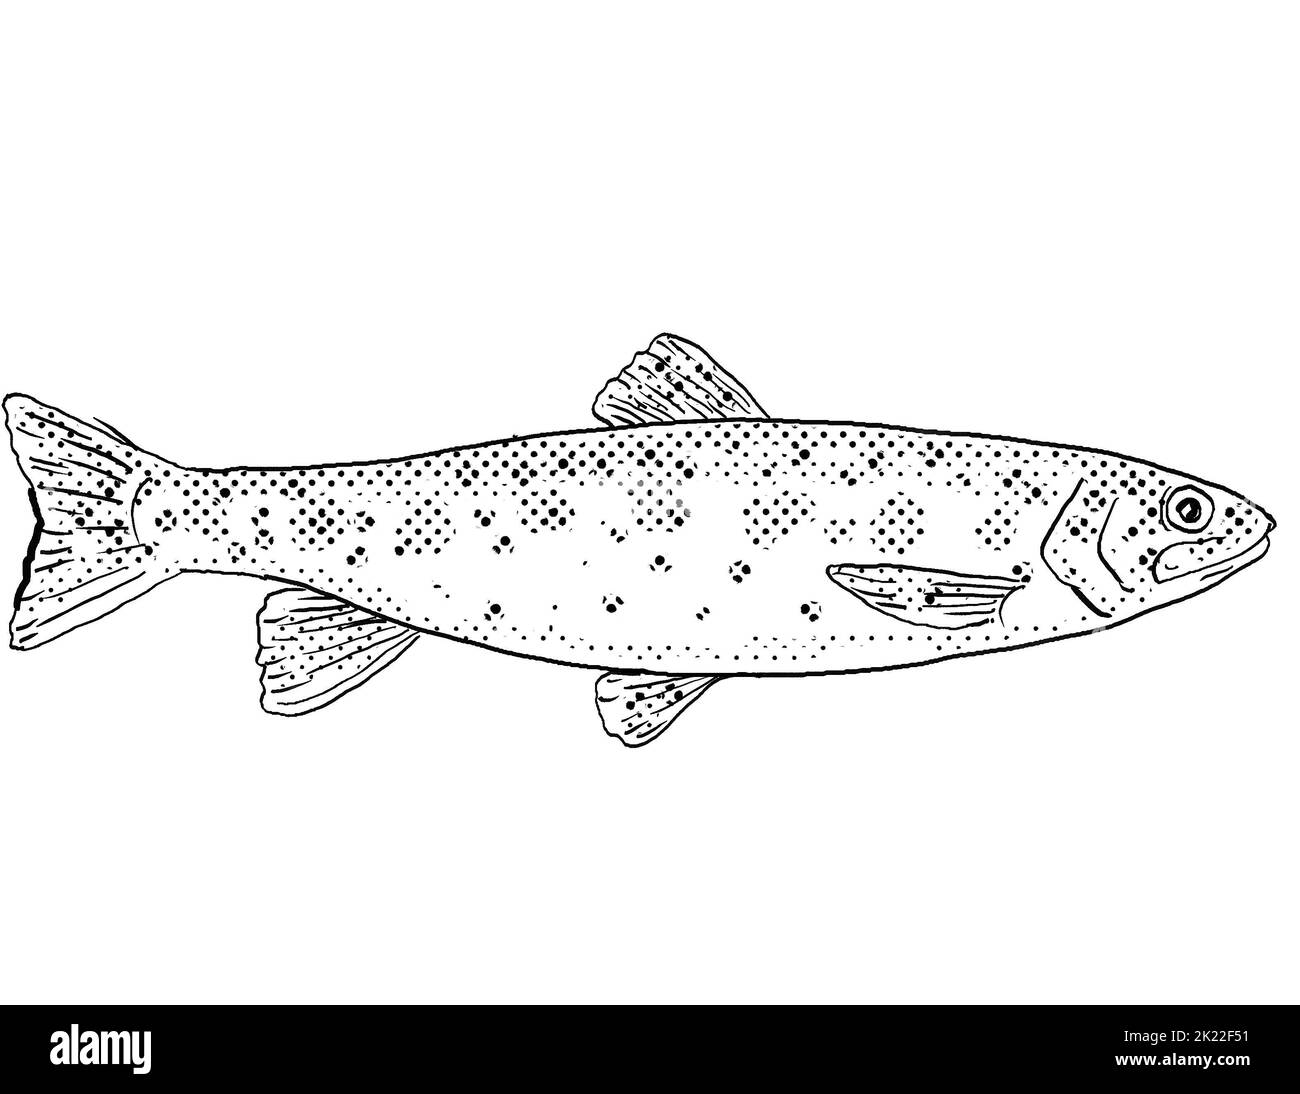 Cartoon style line drawing of a Athabasca rainbow trout or Oncorhynchus mykiss a freshwater fish endemic to North America with halftone dots shading o Stock Photo